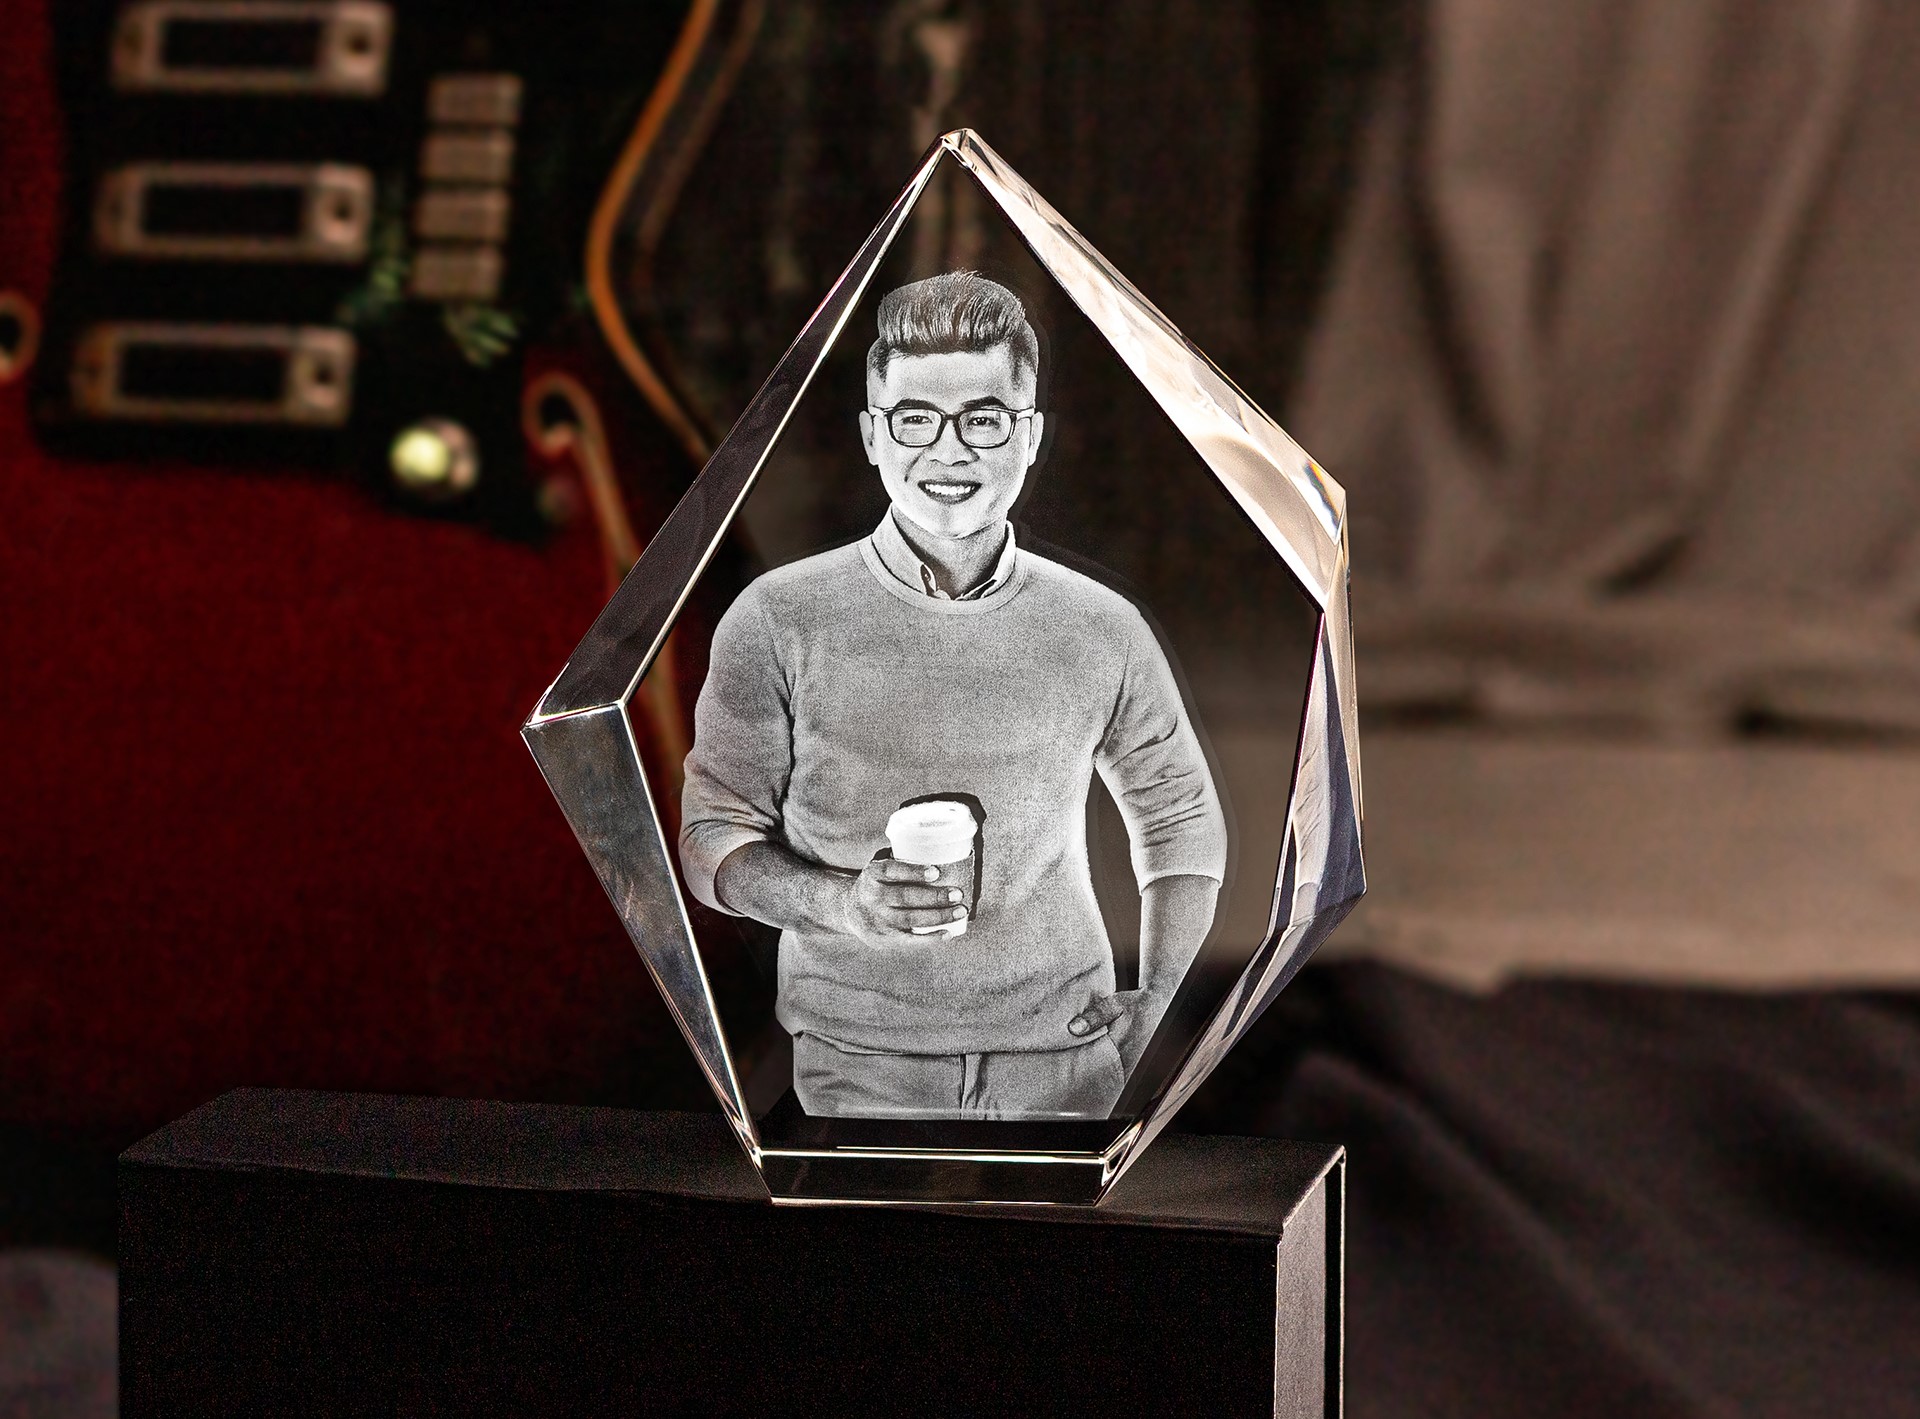 A unique crystal gift with a photo of a stylish young man engraved inside.